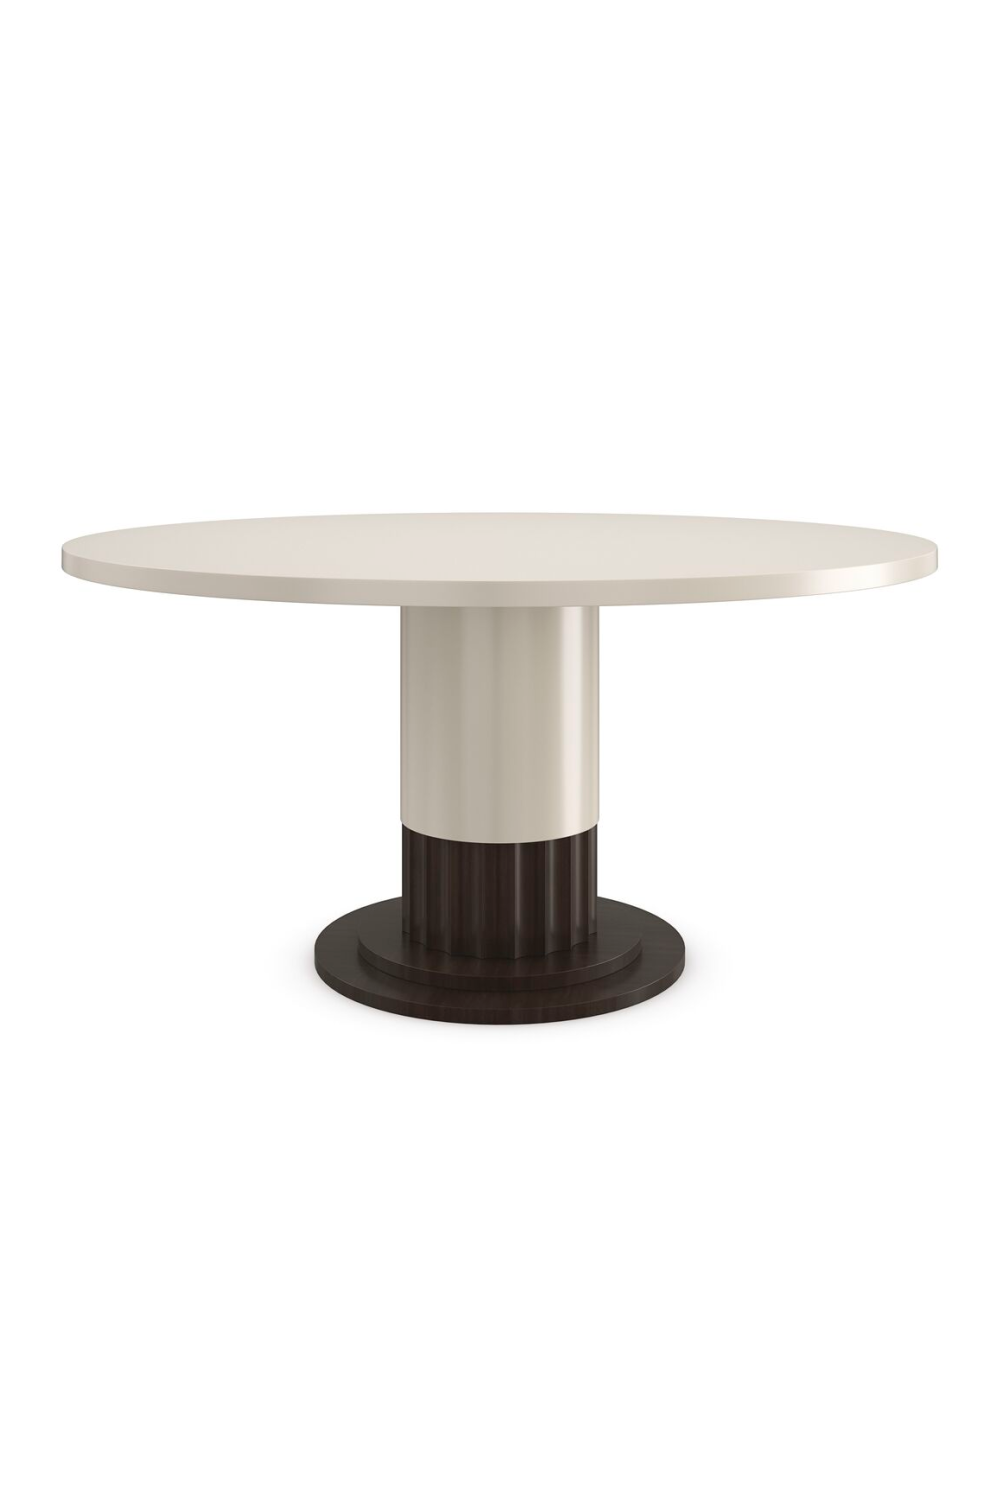 Image of Round Pedestal Dining Table | Caracole Dorian